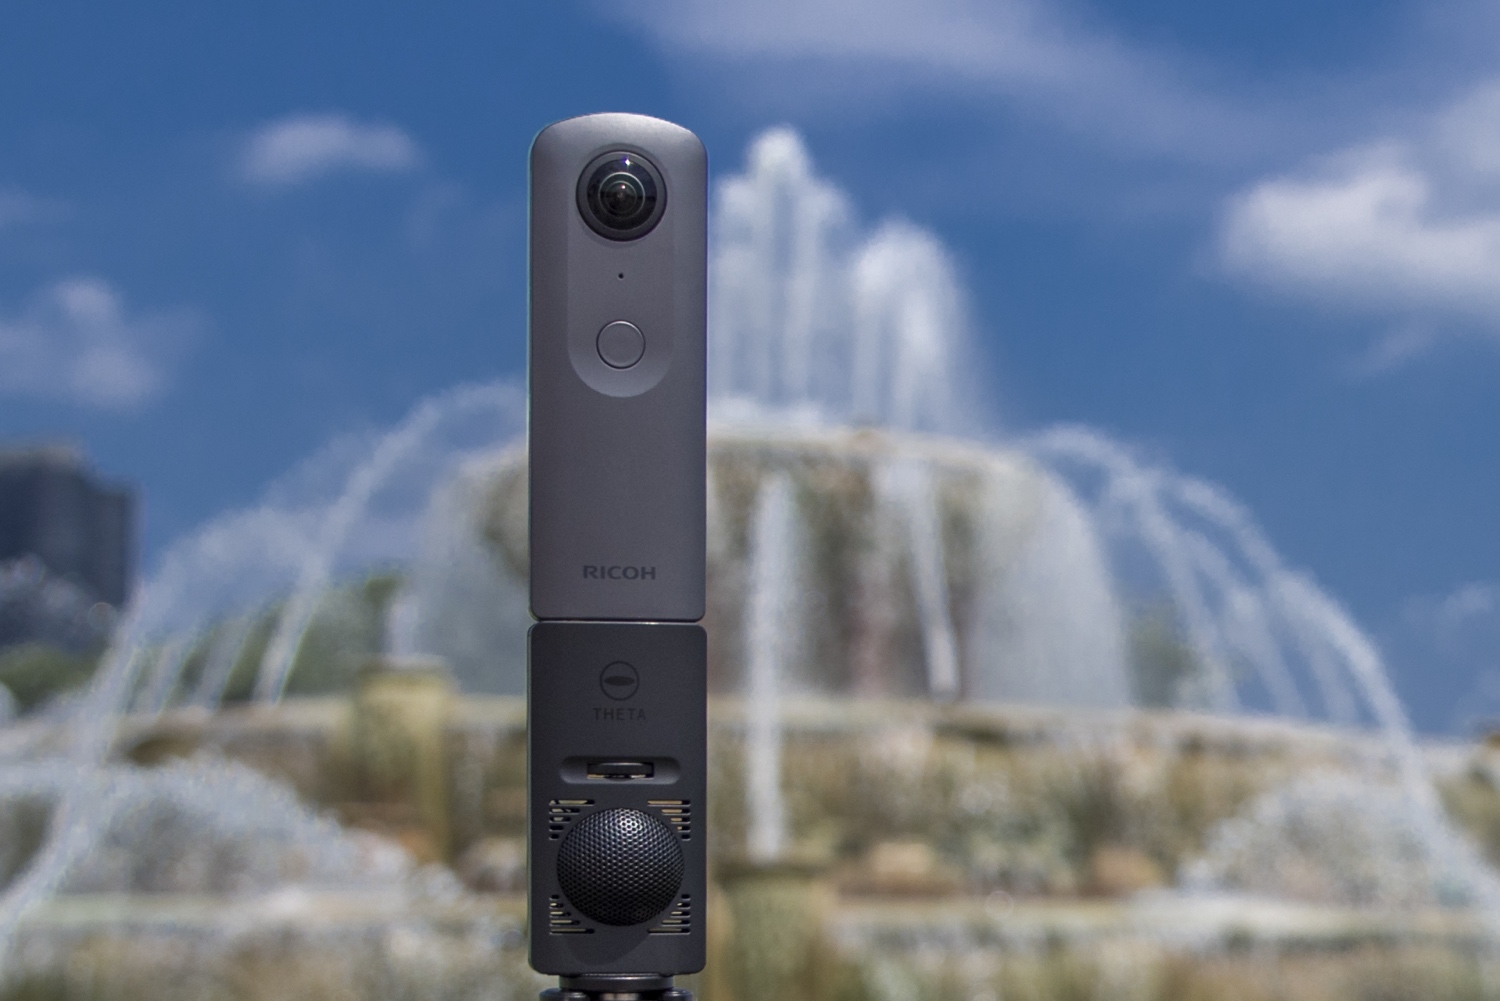 First Look: Ricoh Theta V Brings Reality to VR with 4K, Surround